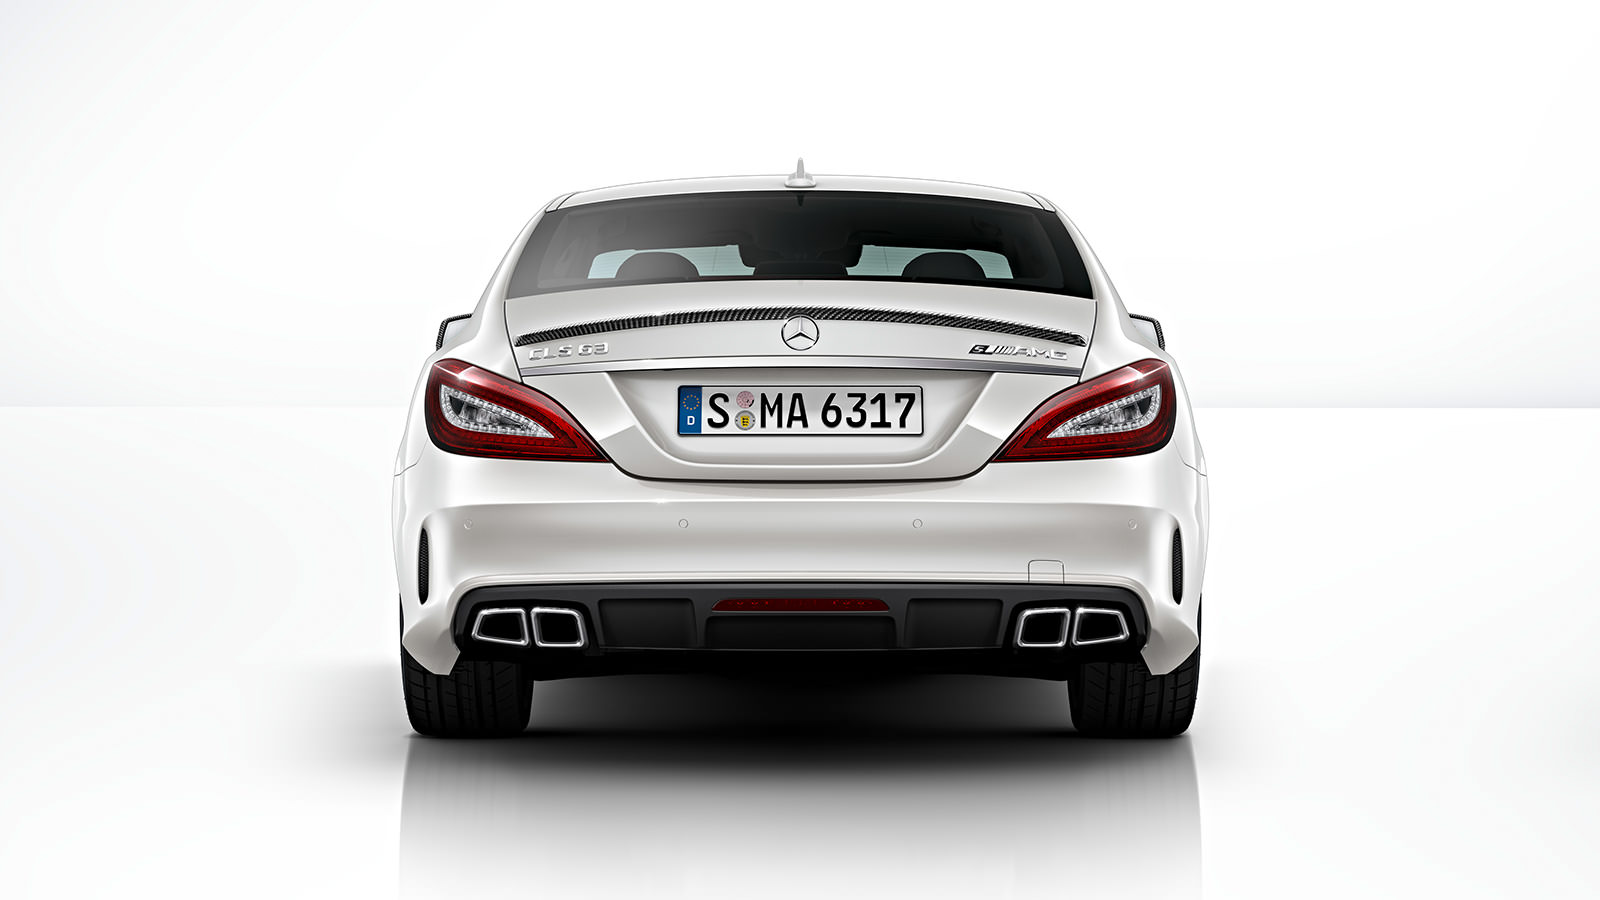 Mercedes Benz AMG CLS 63 S rear view